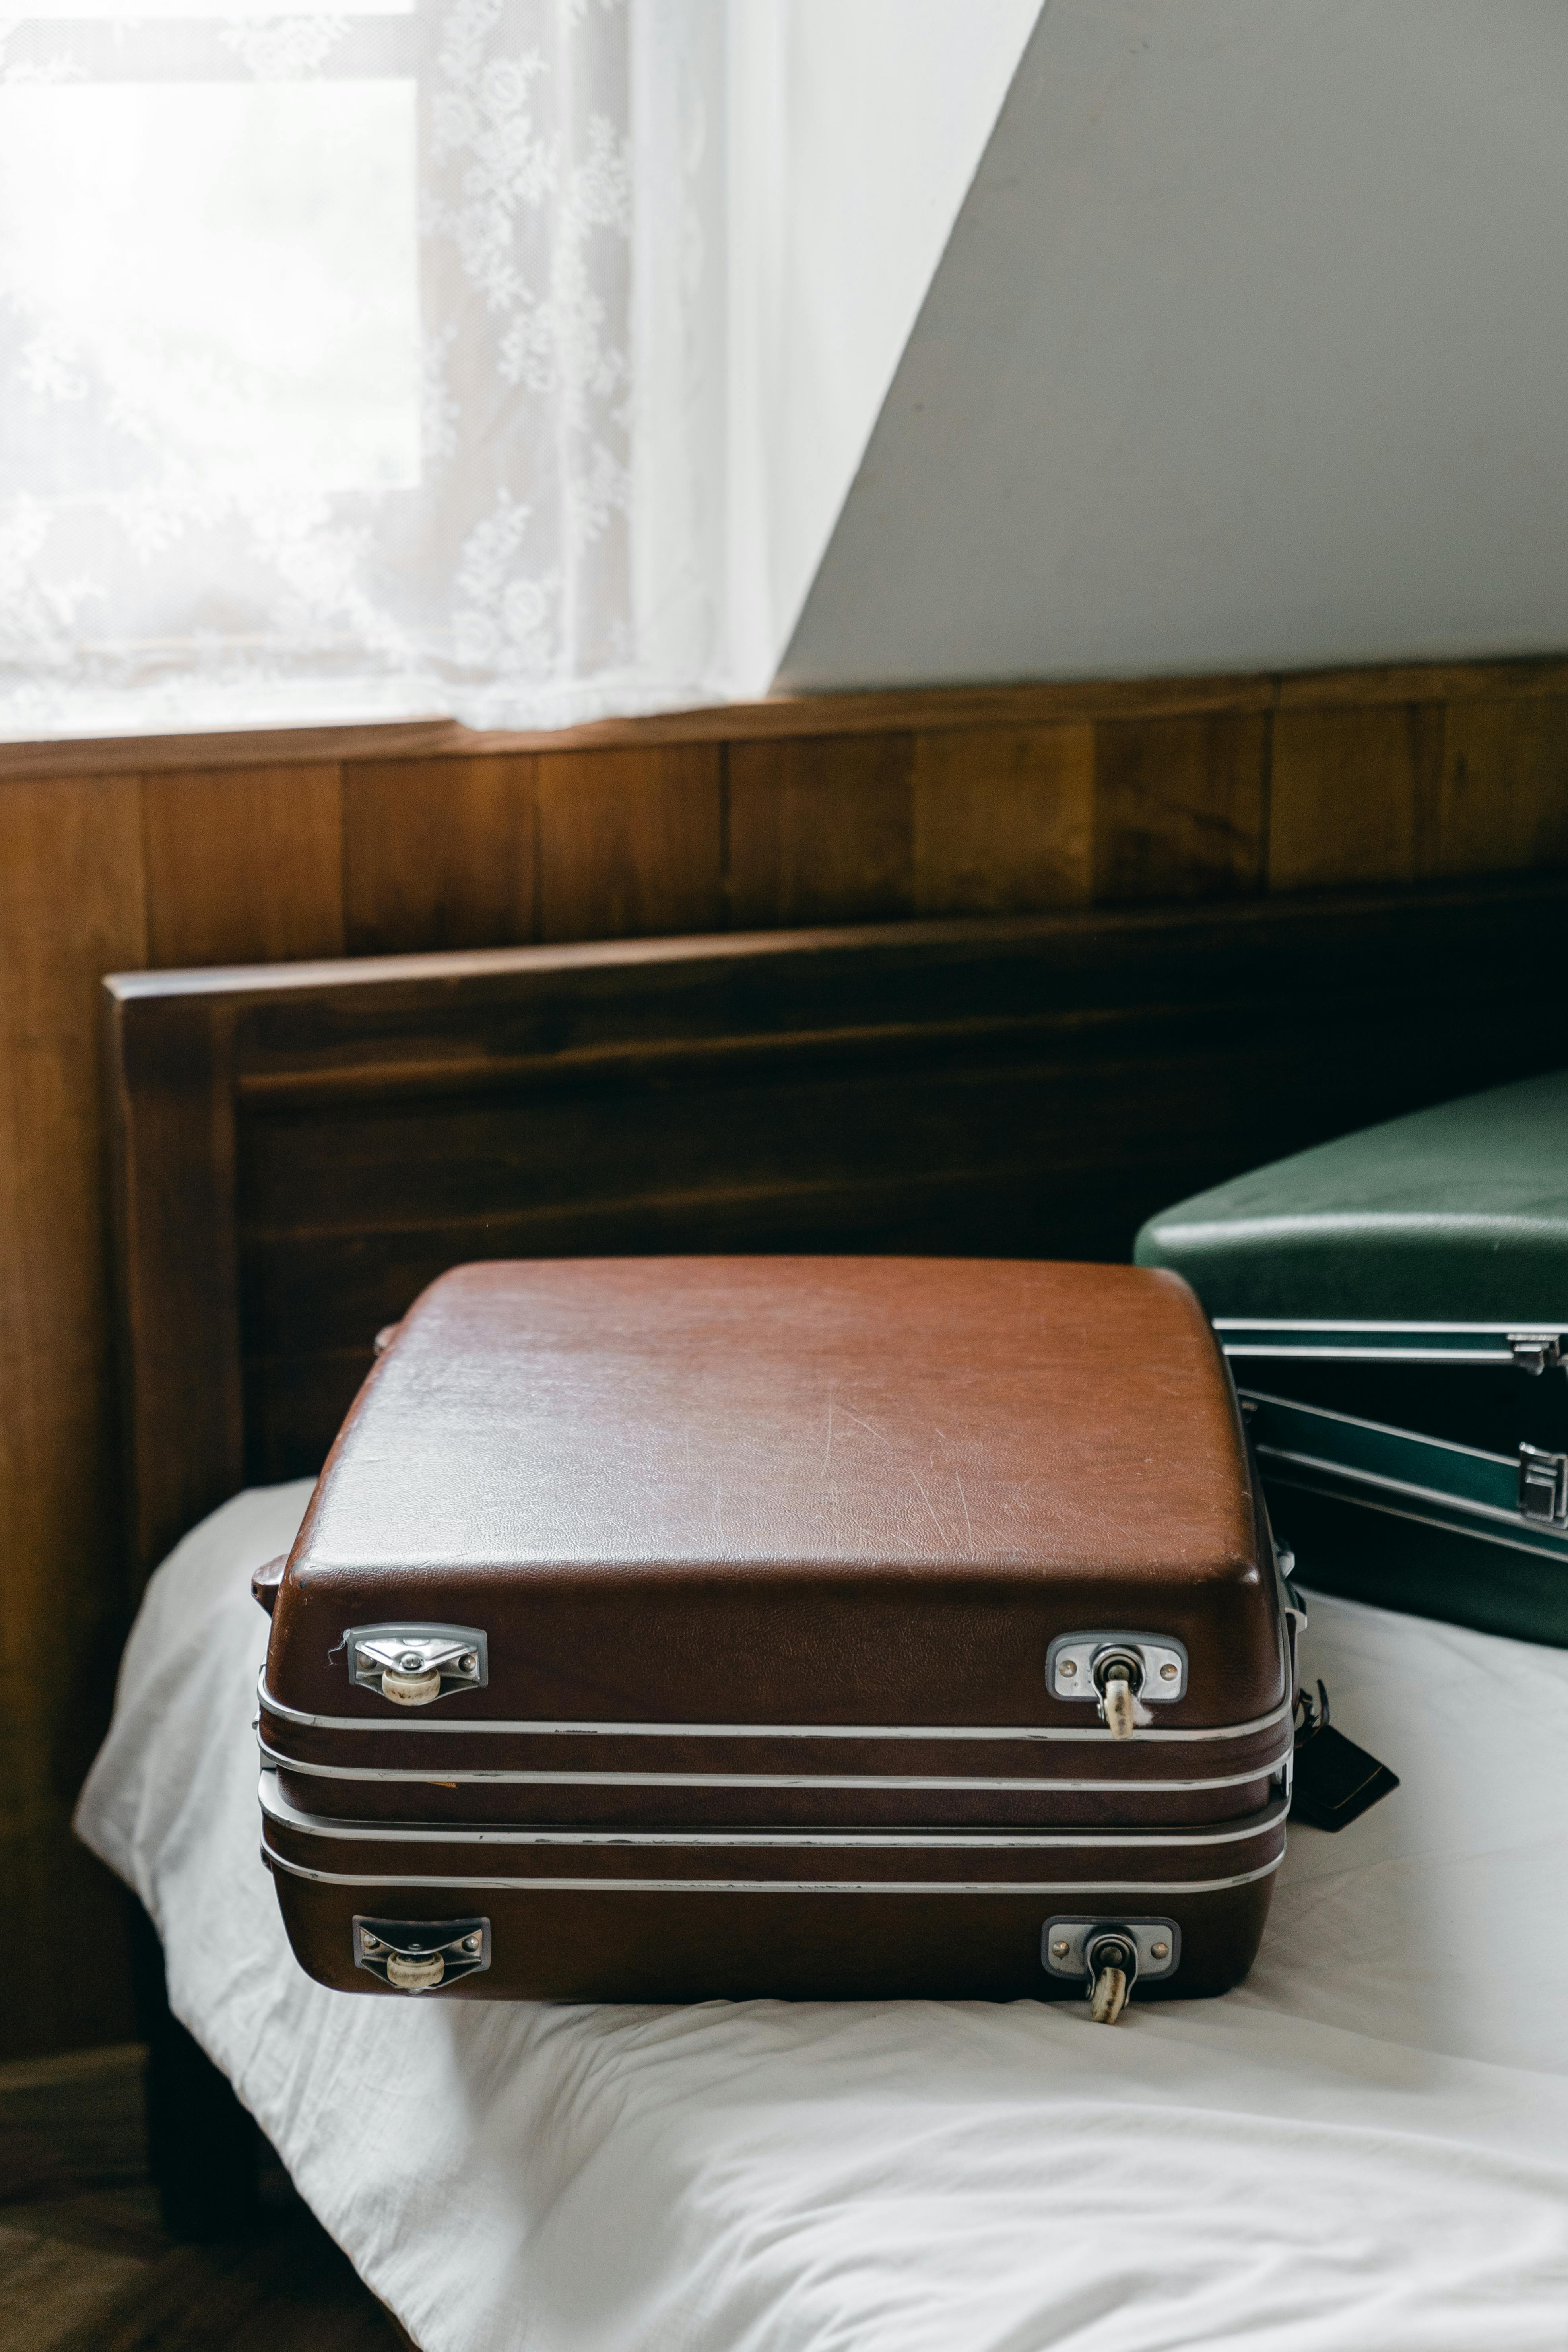 suitcases placed on edge of bed